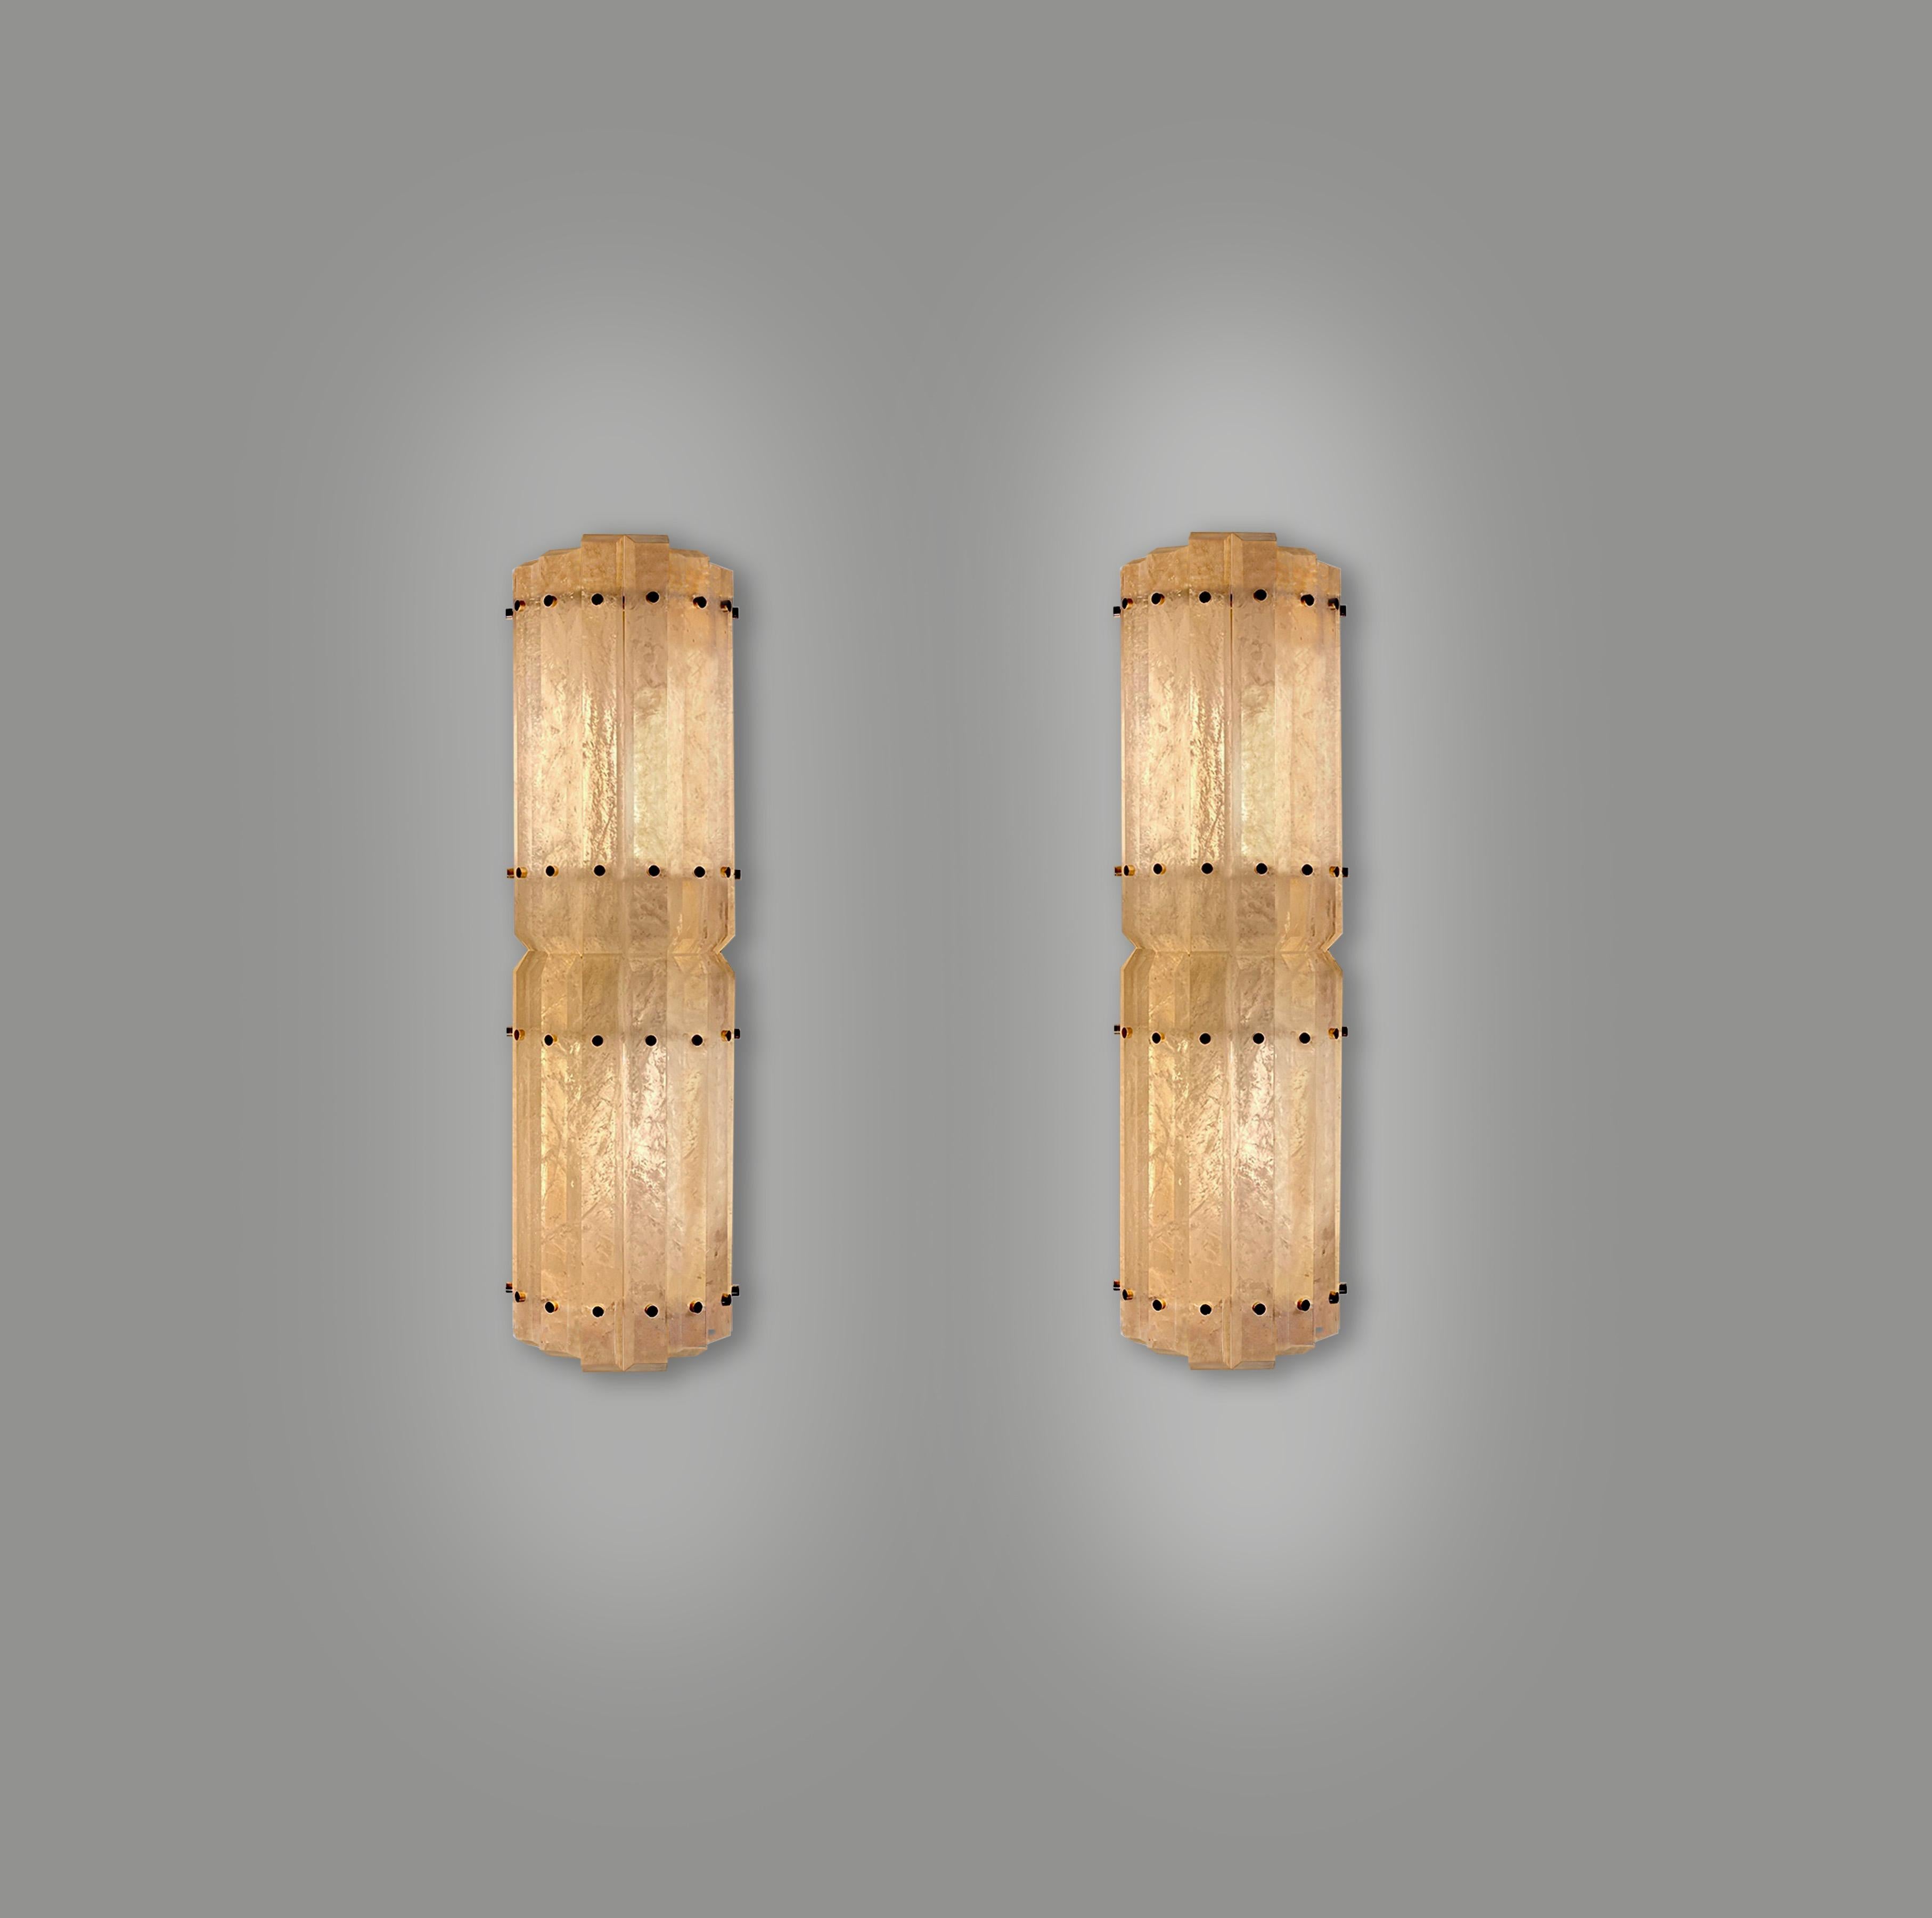 Pair of modern rock crystal sconces with aged brass decorations,Created by Phoenix Gallery.
Two sockets installed. Use two long tube style LED light bulbs, 160w total.